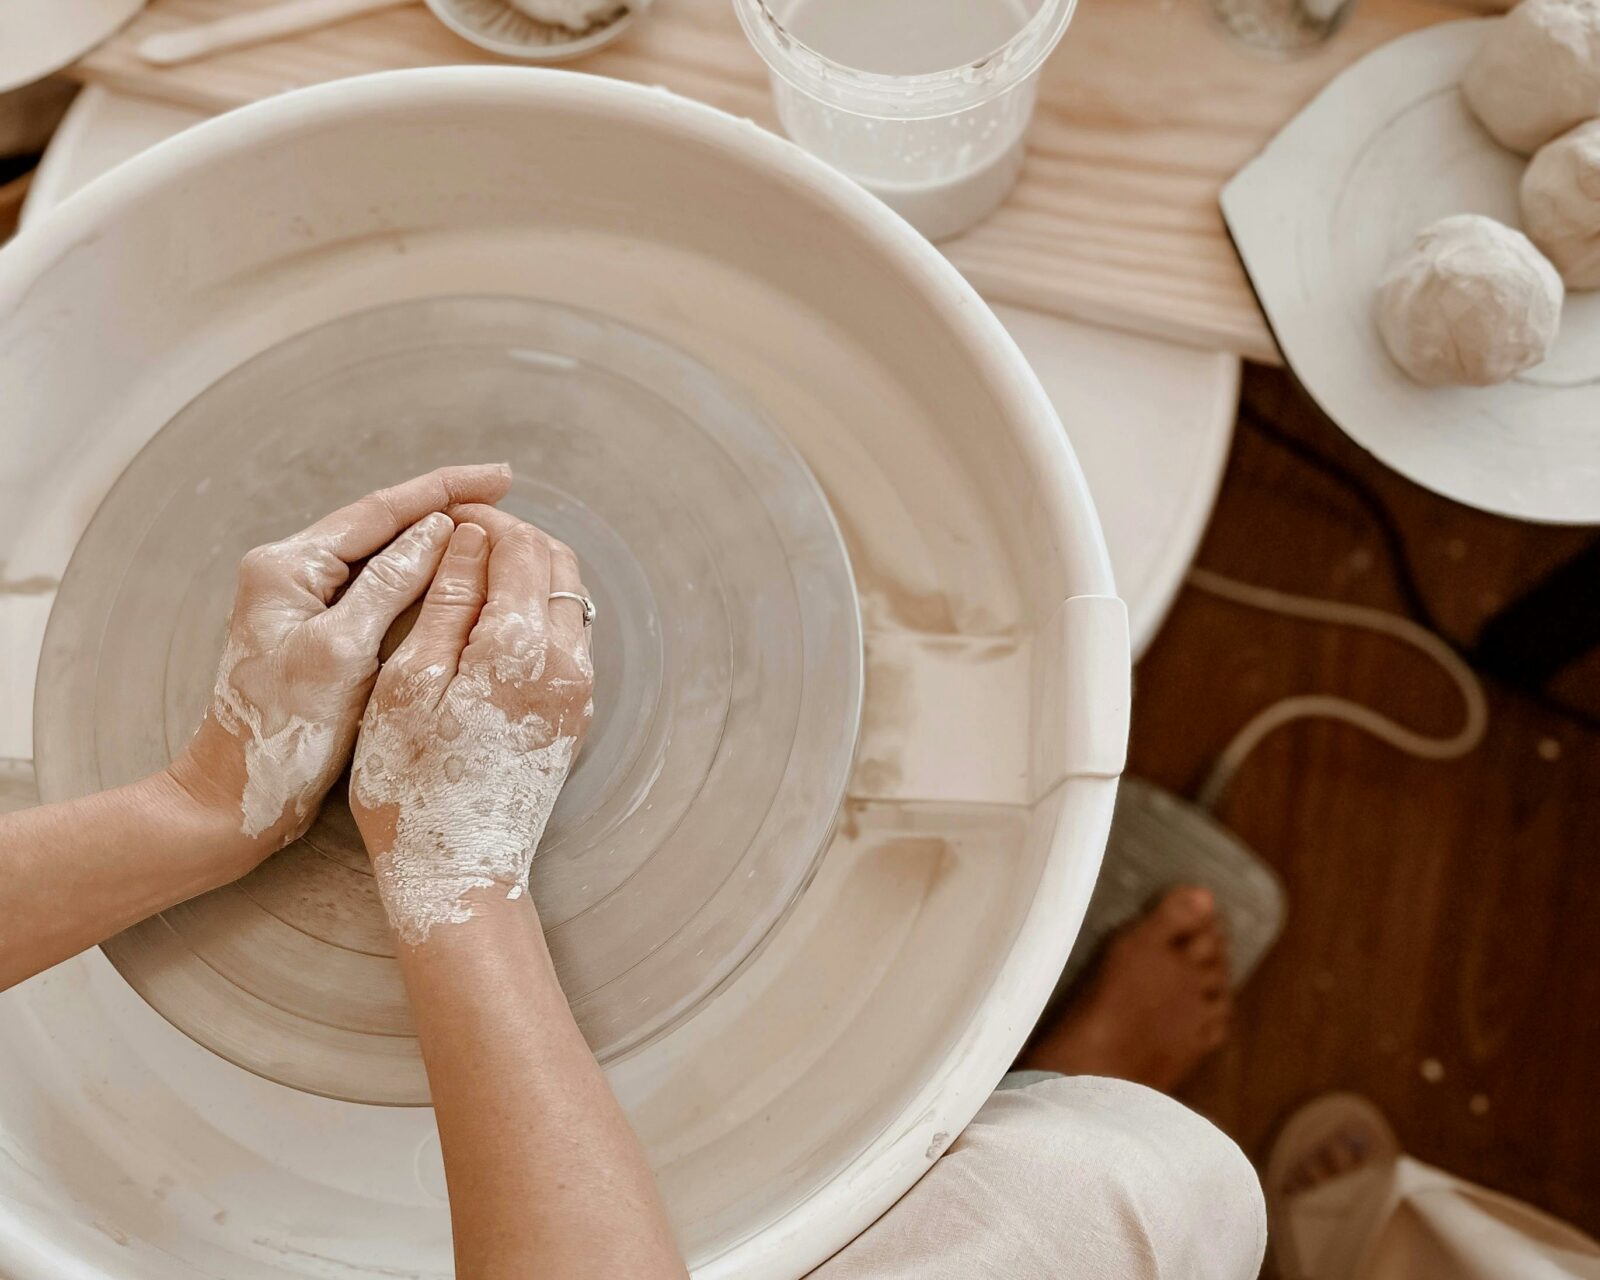 Hands mould clay on pottery wheel